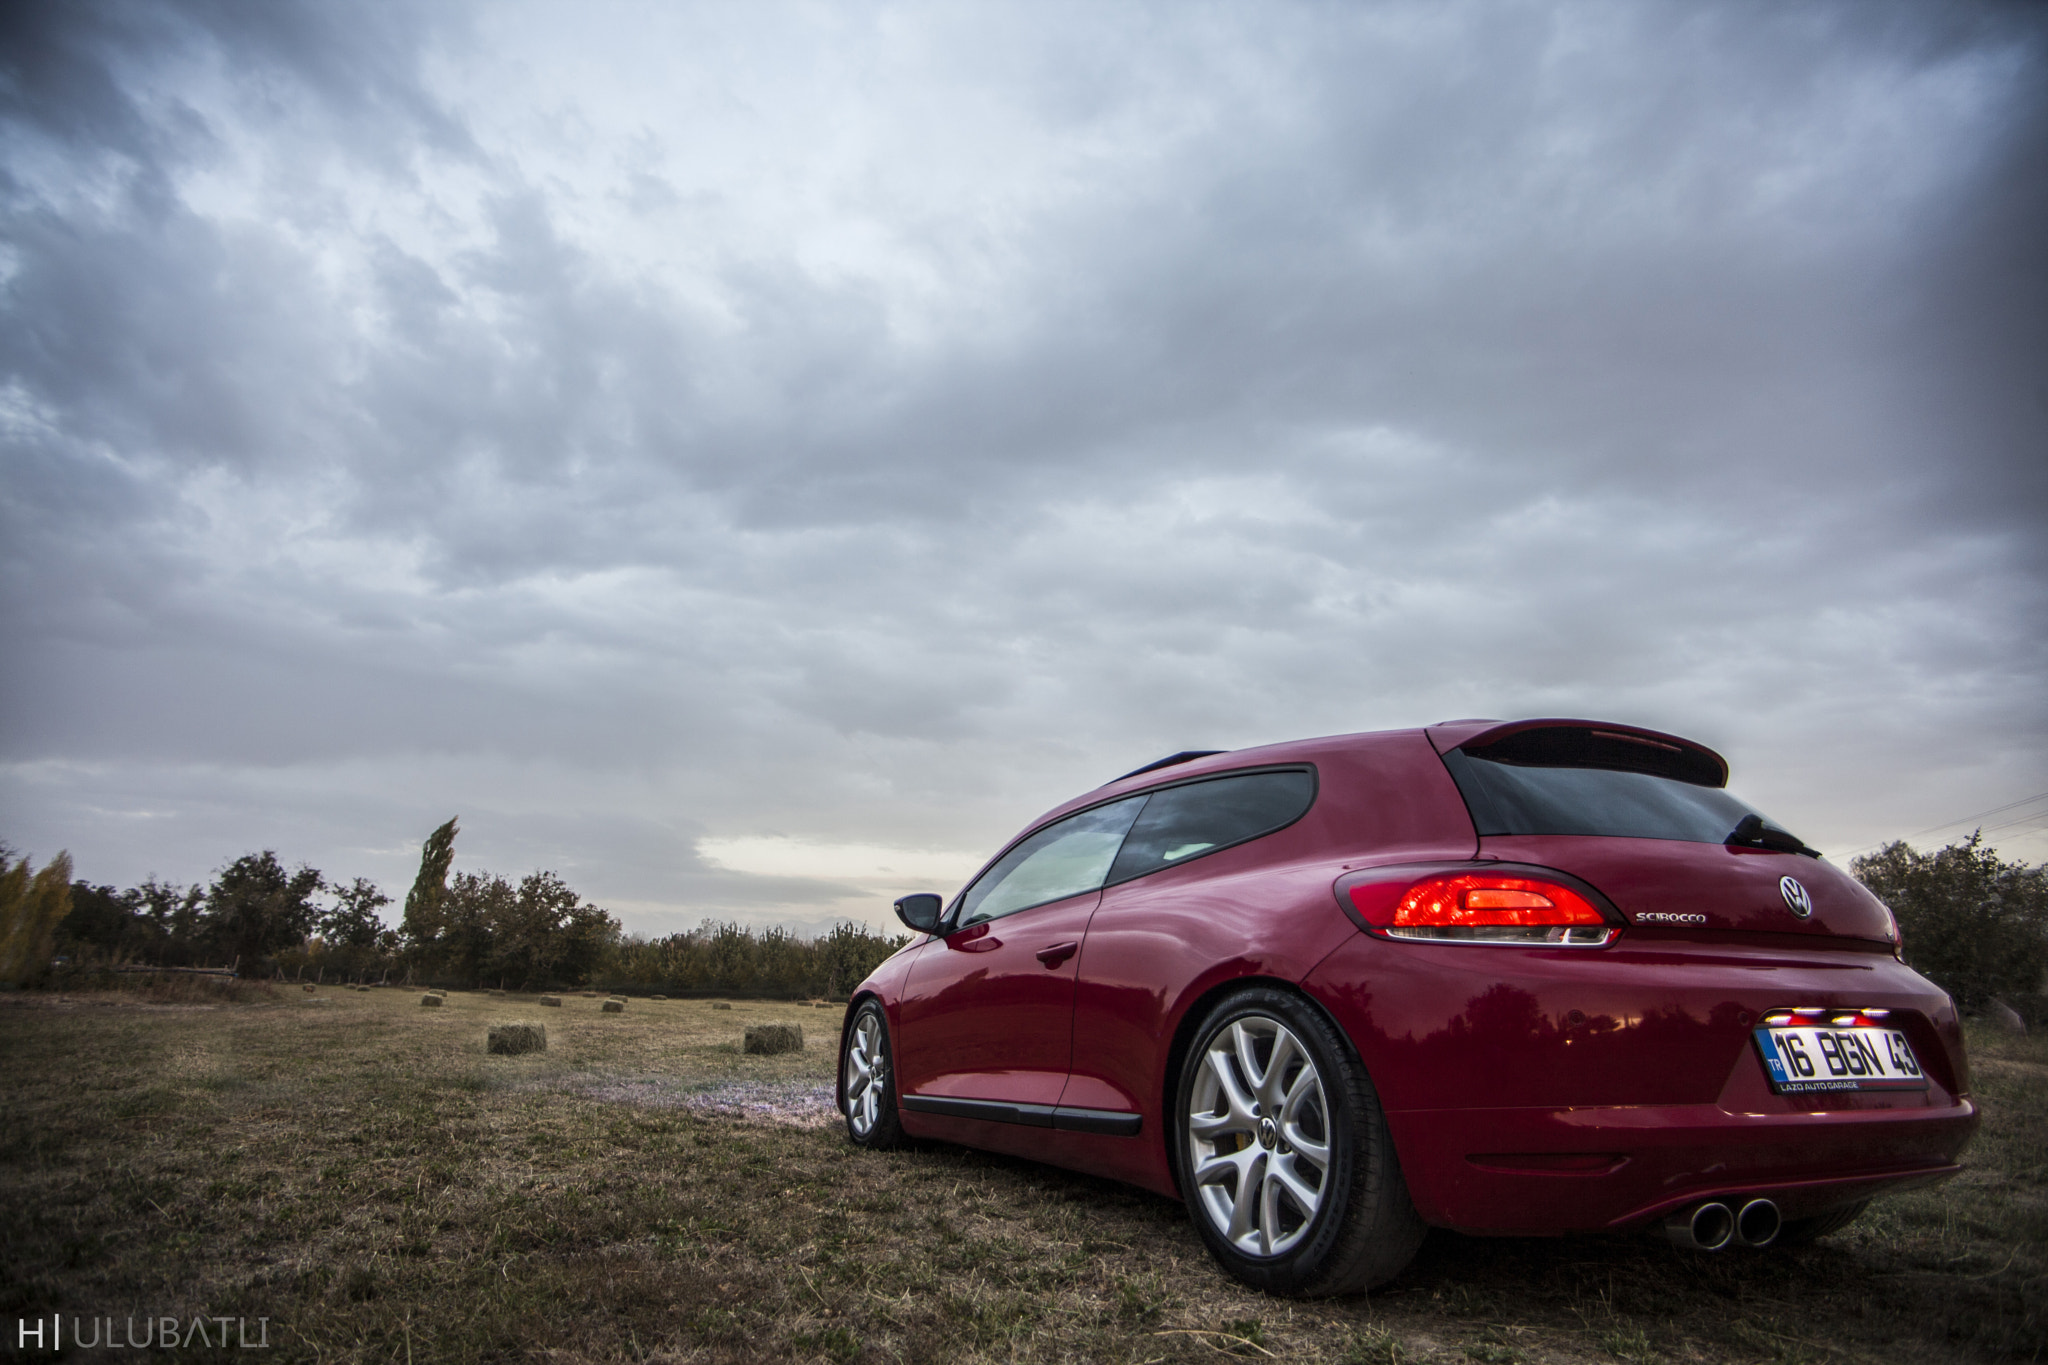 Tamron AF 19-35mm f/3.5-4.5 sample photo. Vw scirocco photography